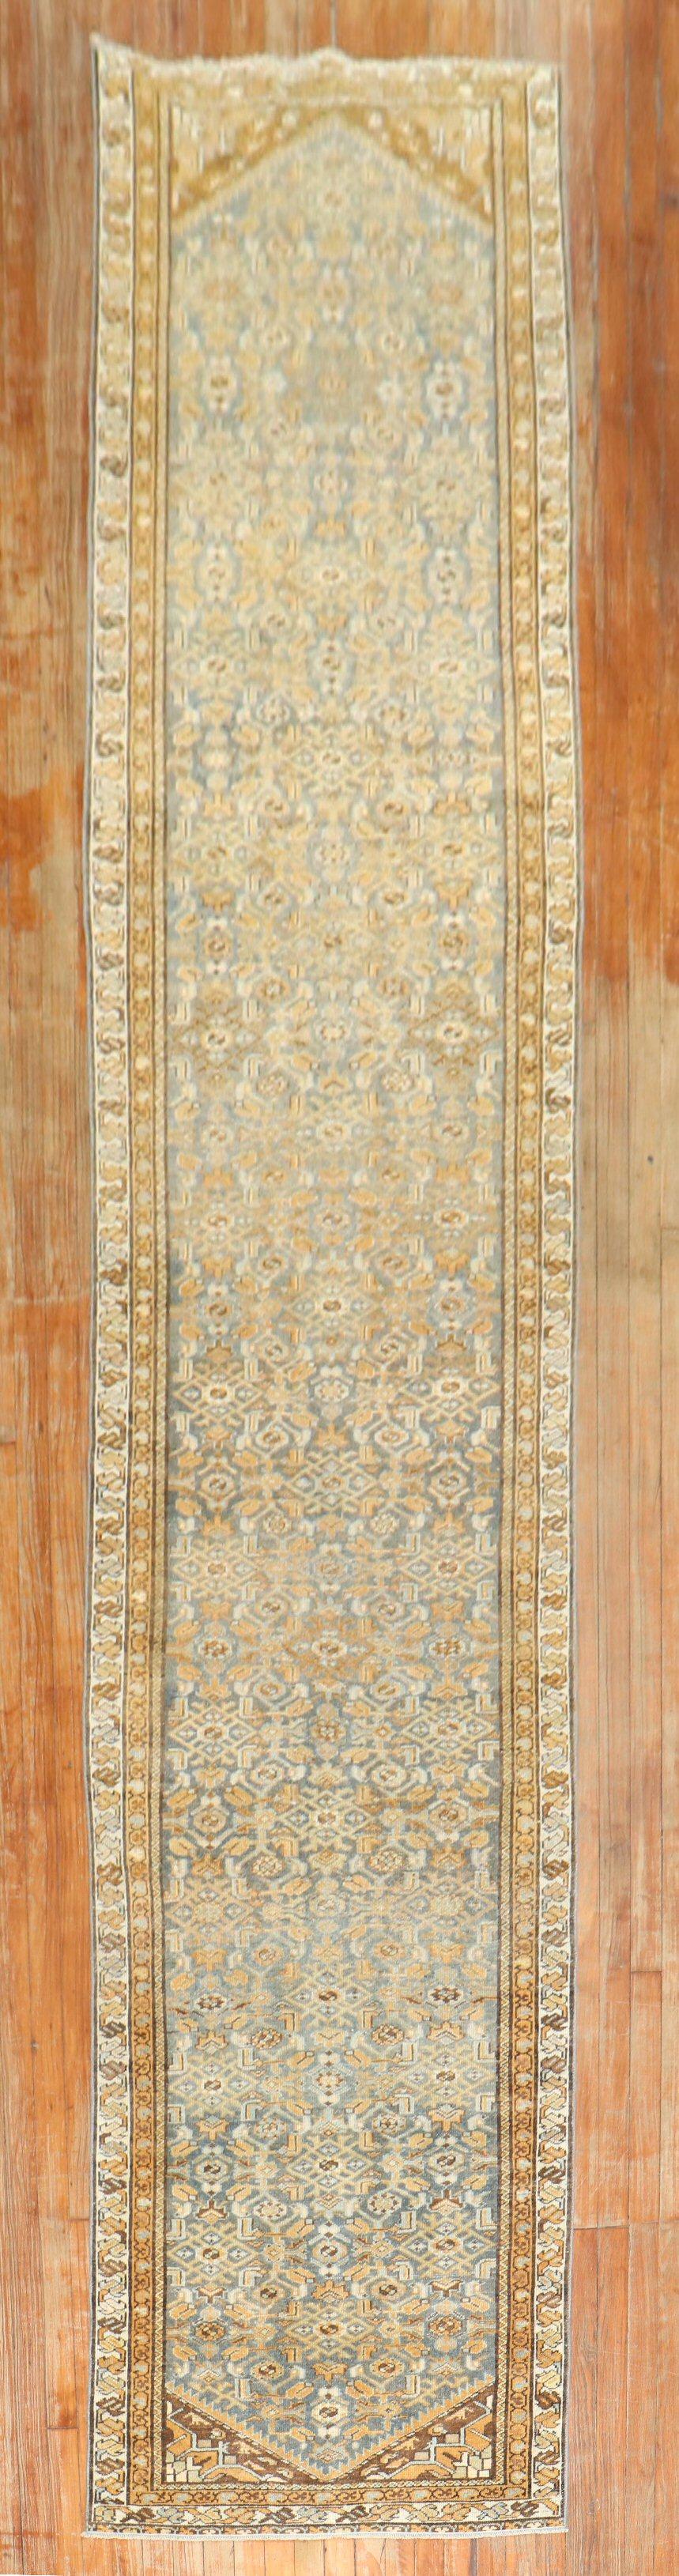 An early 20th century Persian Malayer long runner in warm colors

Measures: 2'11'' x 15'9''